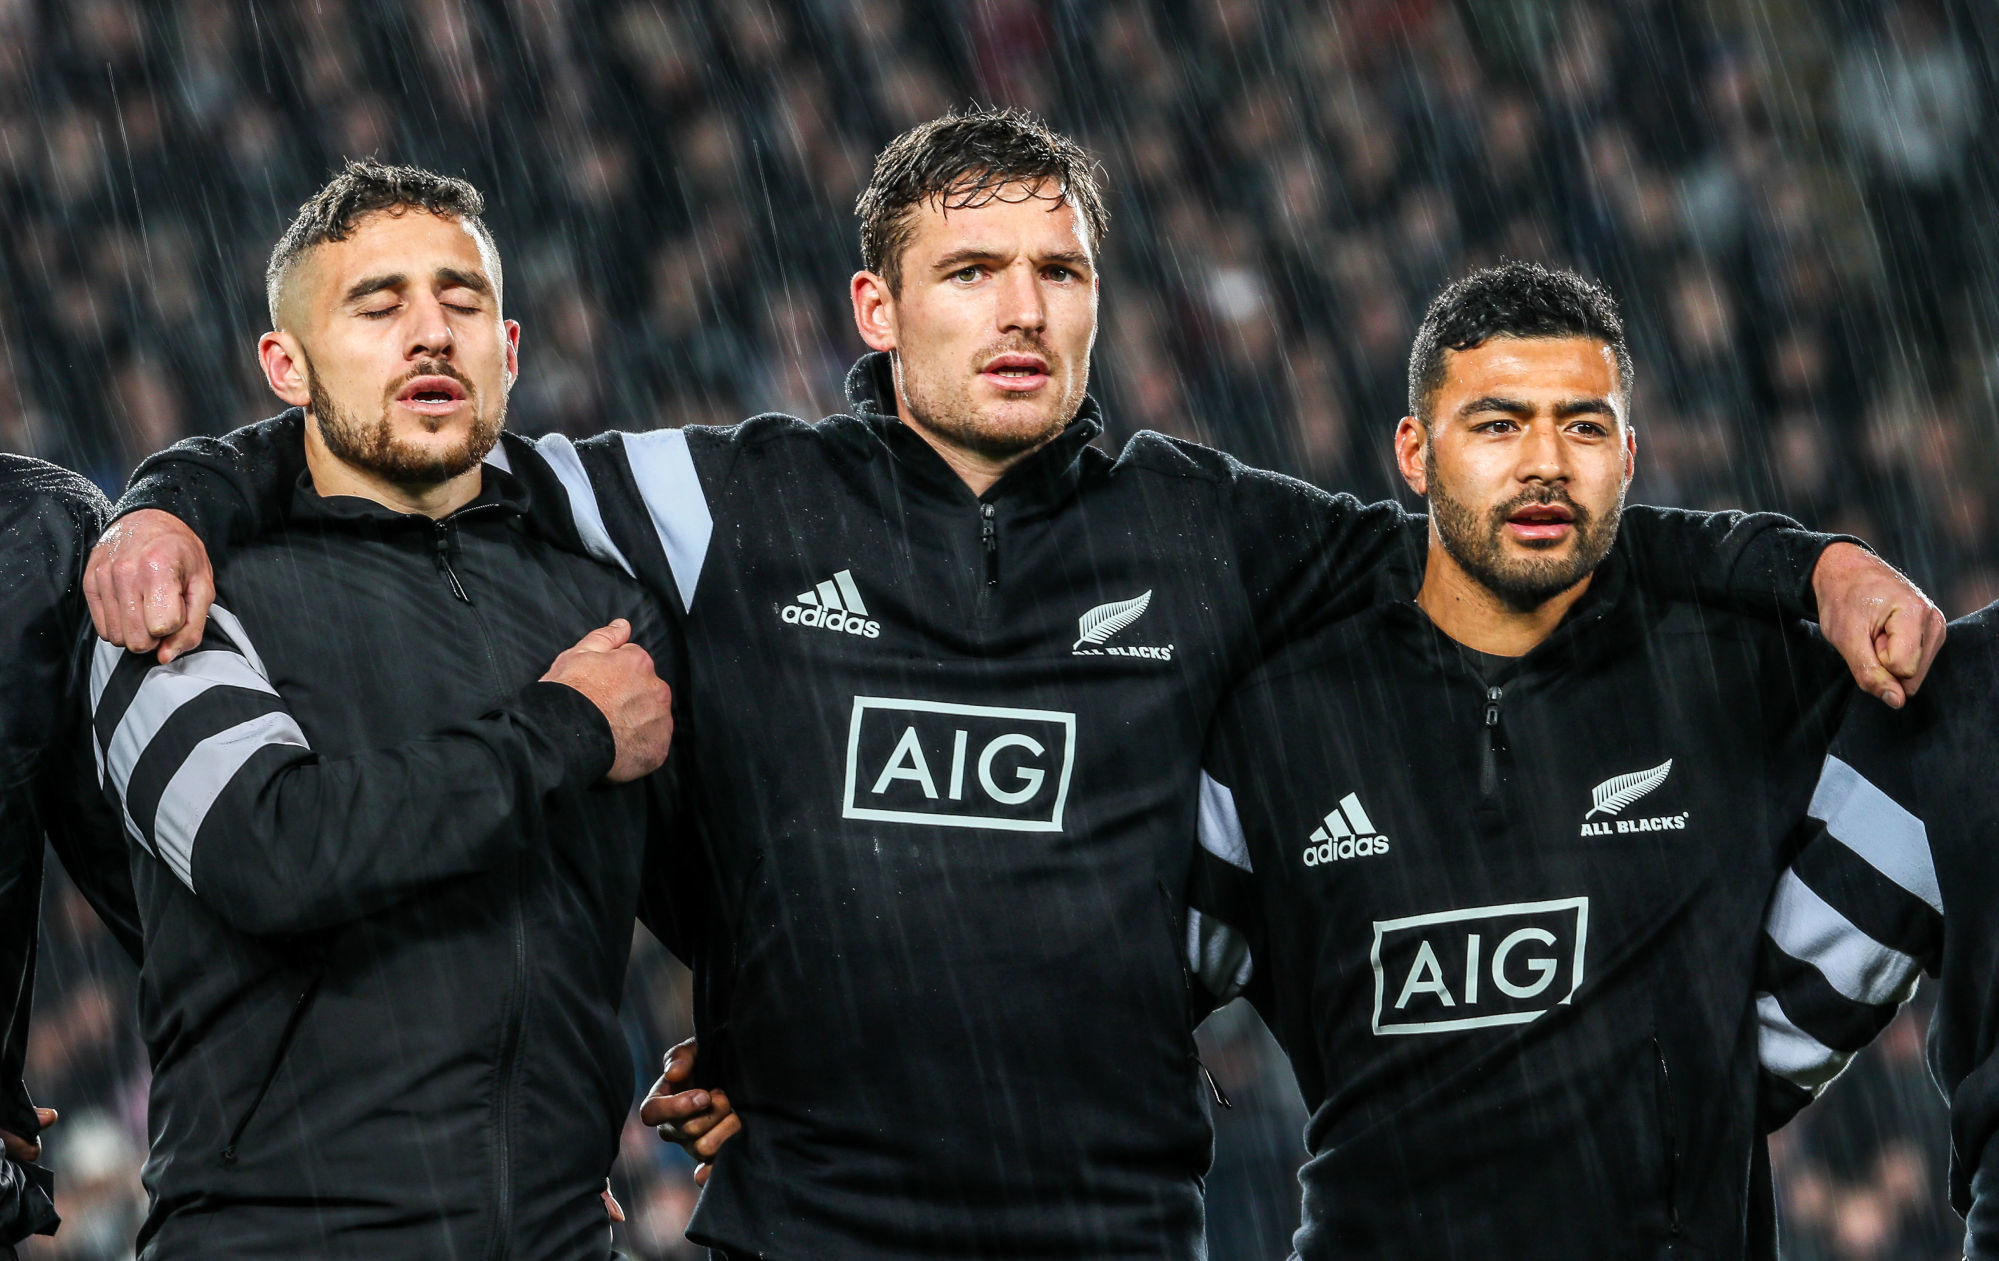 TJ Perenara, George Bridge and Richie Mo'unga line up before the Bledisloe Cup Rugby match between the New Zealand All Blacks and Australia Wallabies at Eden Park in Auckland, New Zealand on Saturday, 17 August 2019. Photo : Dave Lintott / Icon Sport